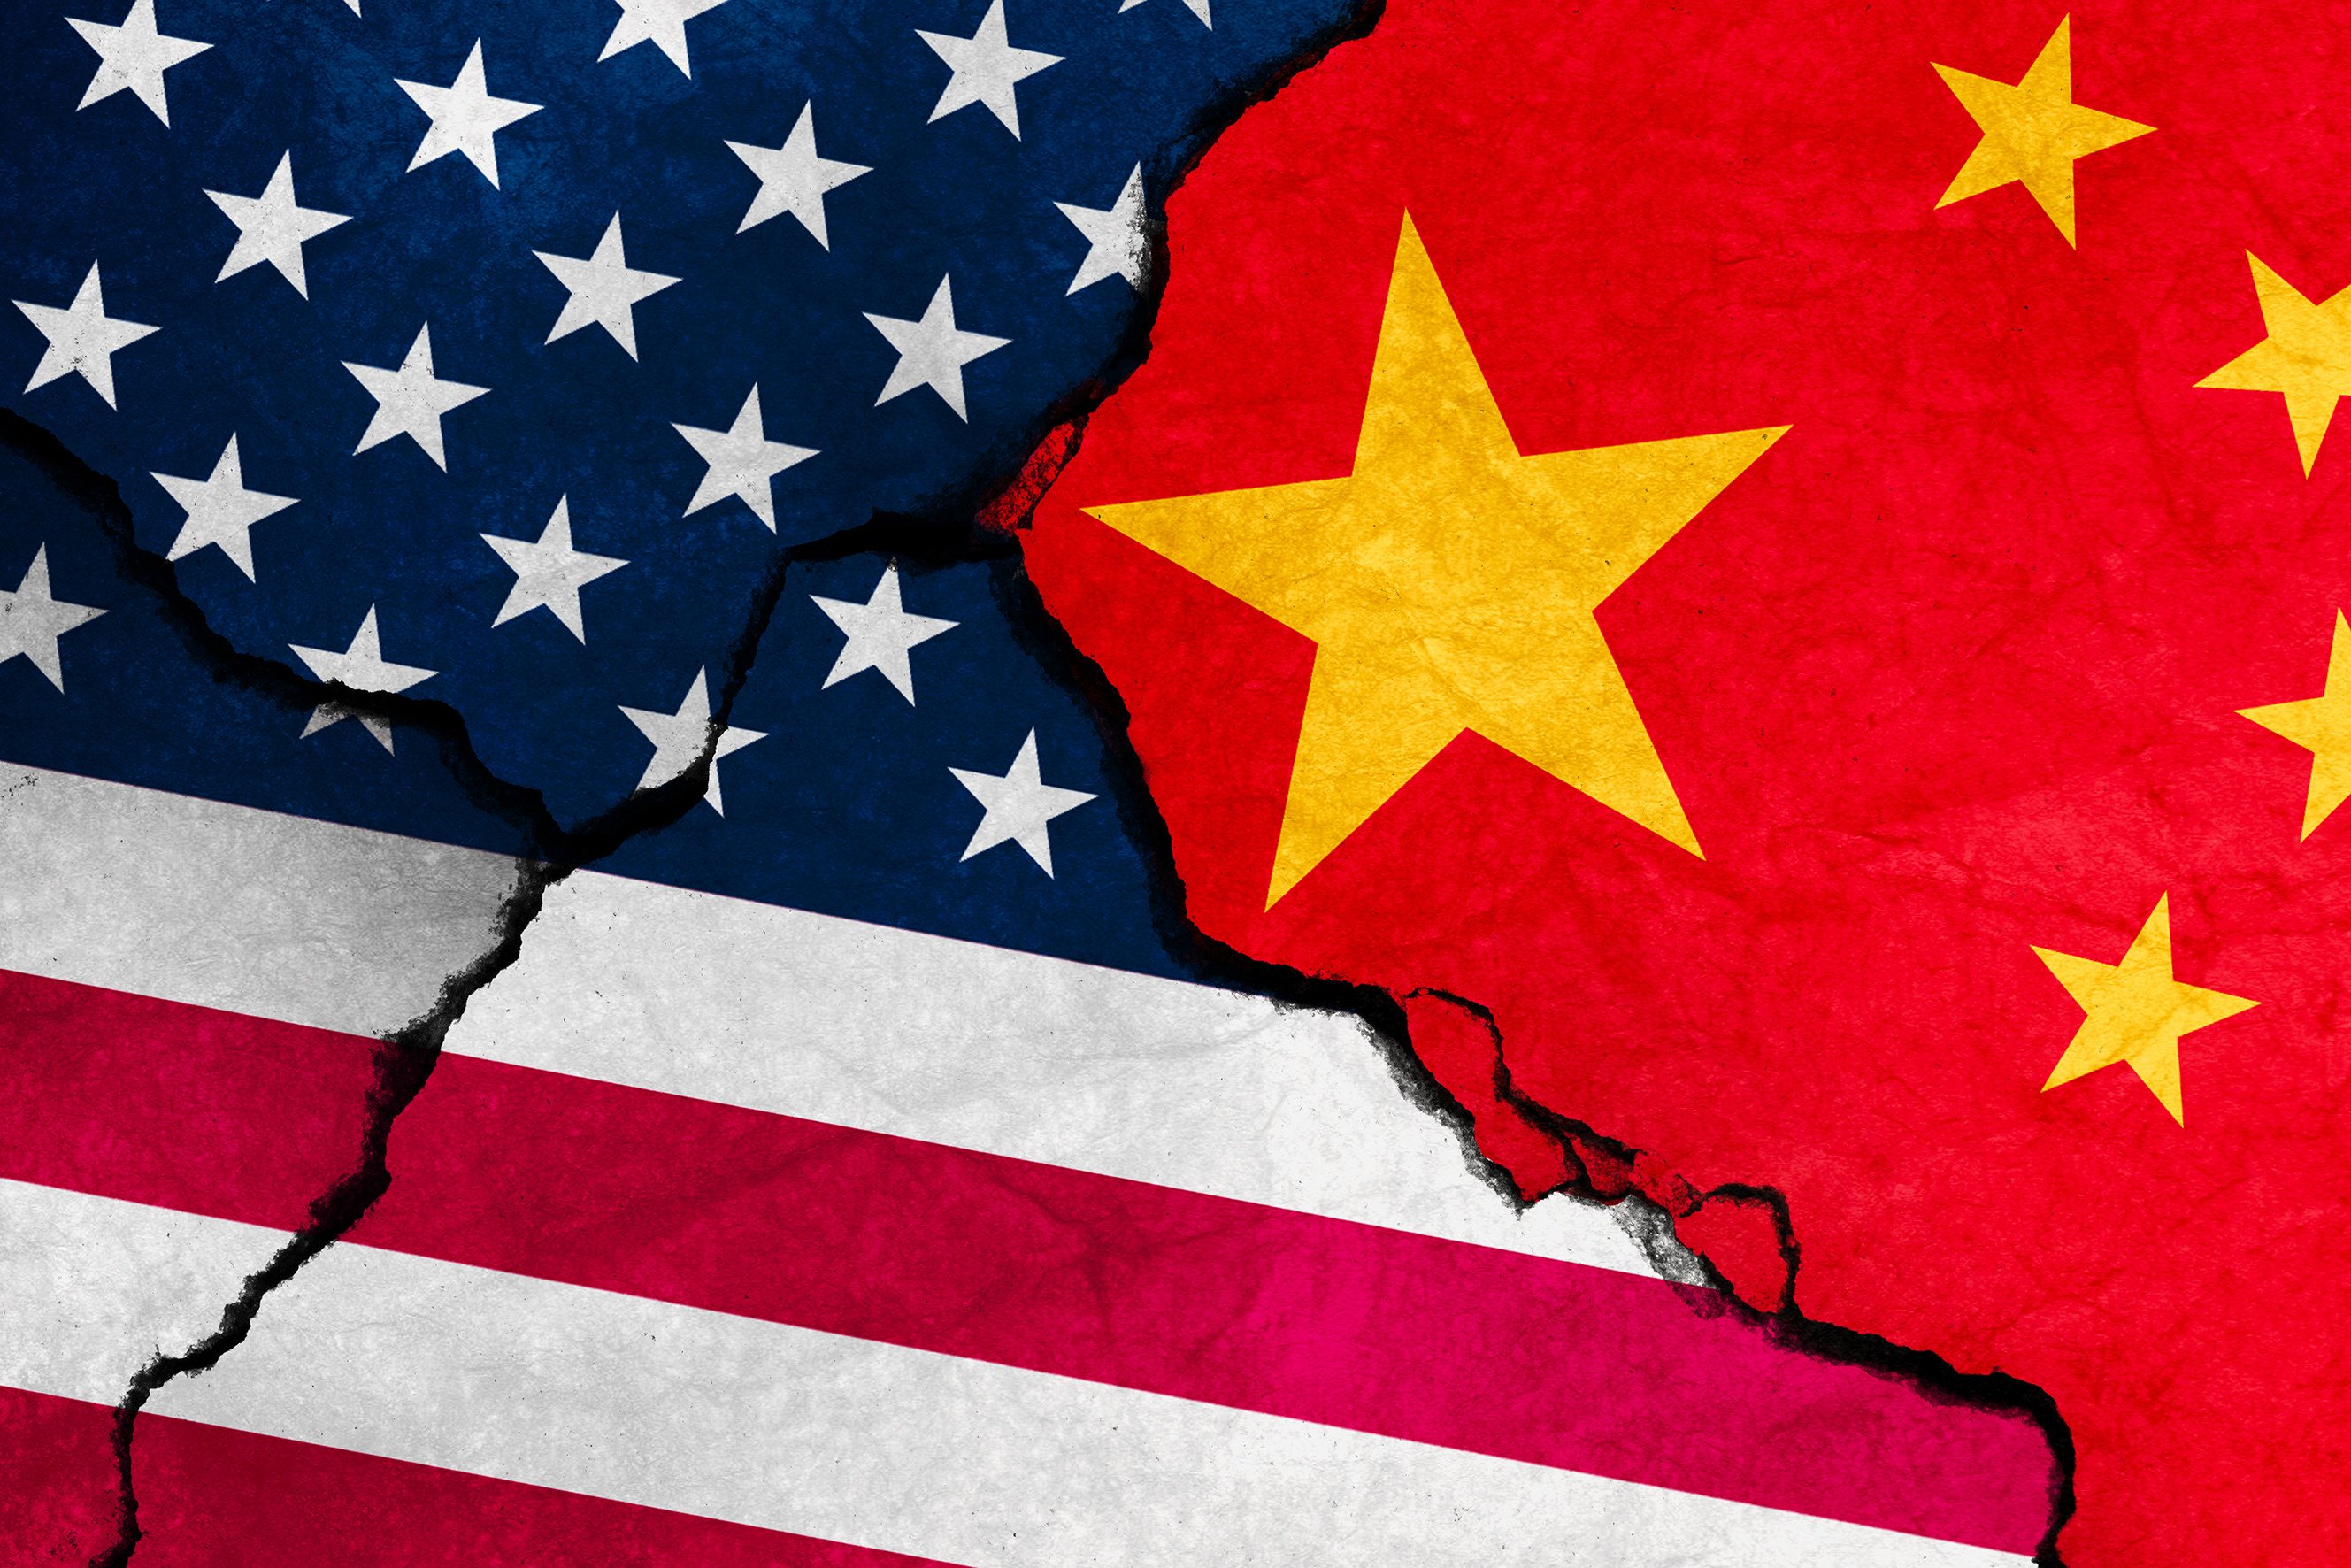 Washington has slammed China’s compliance within the WTO, and Beijing responded by accusing the US of shifting the blame from its own behaviour. Image: Shutterstock